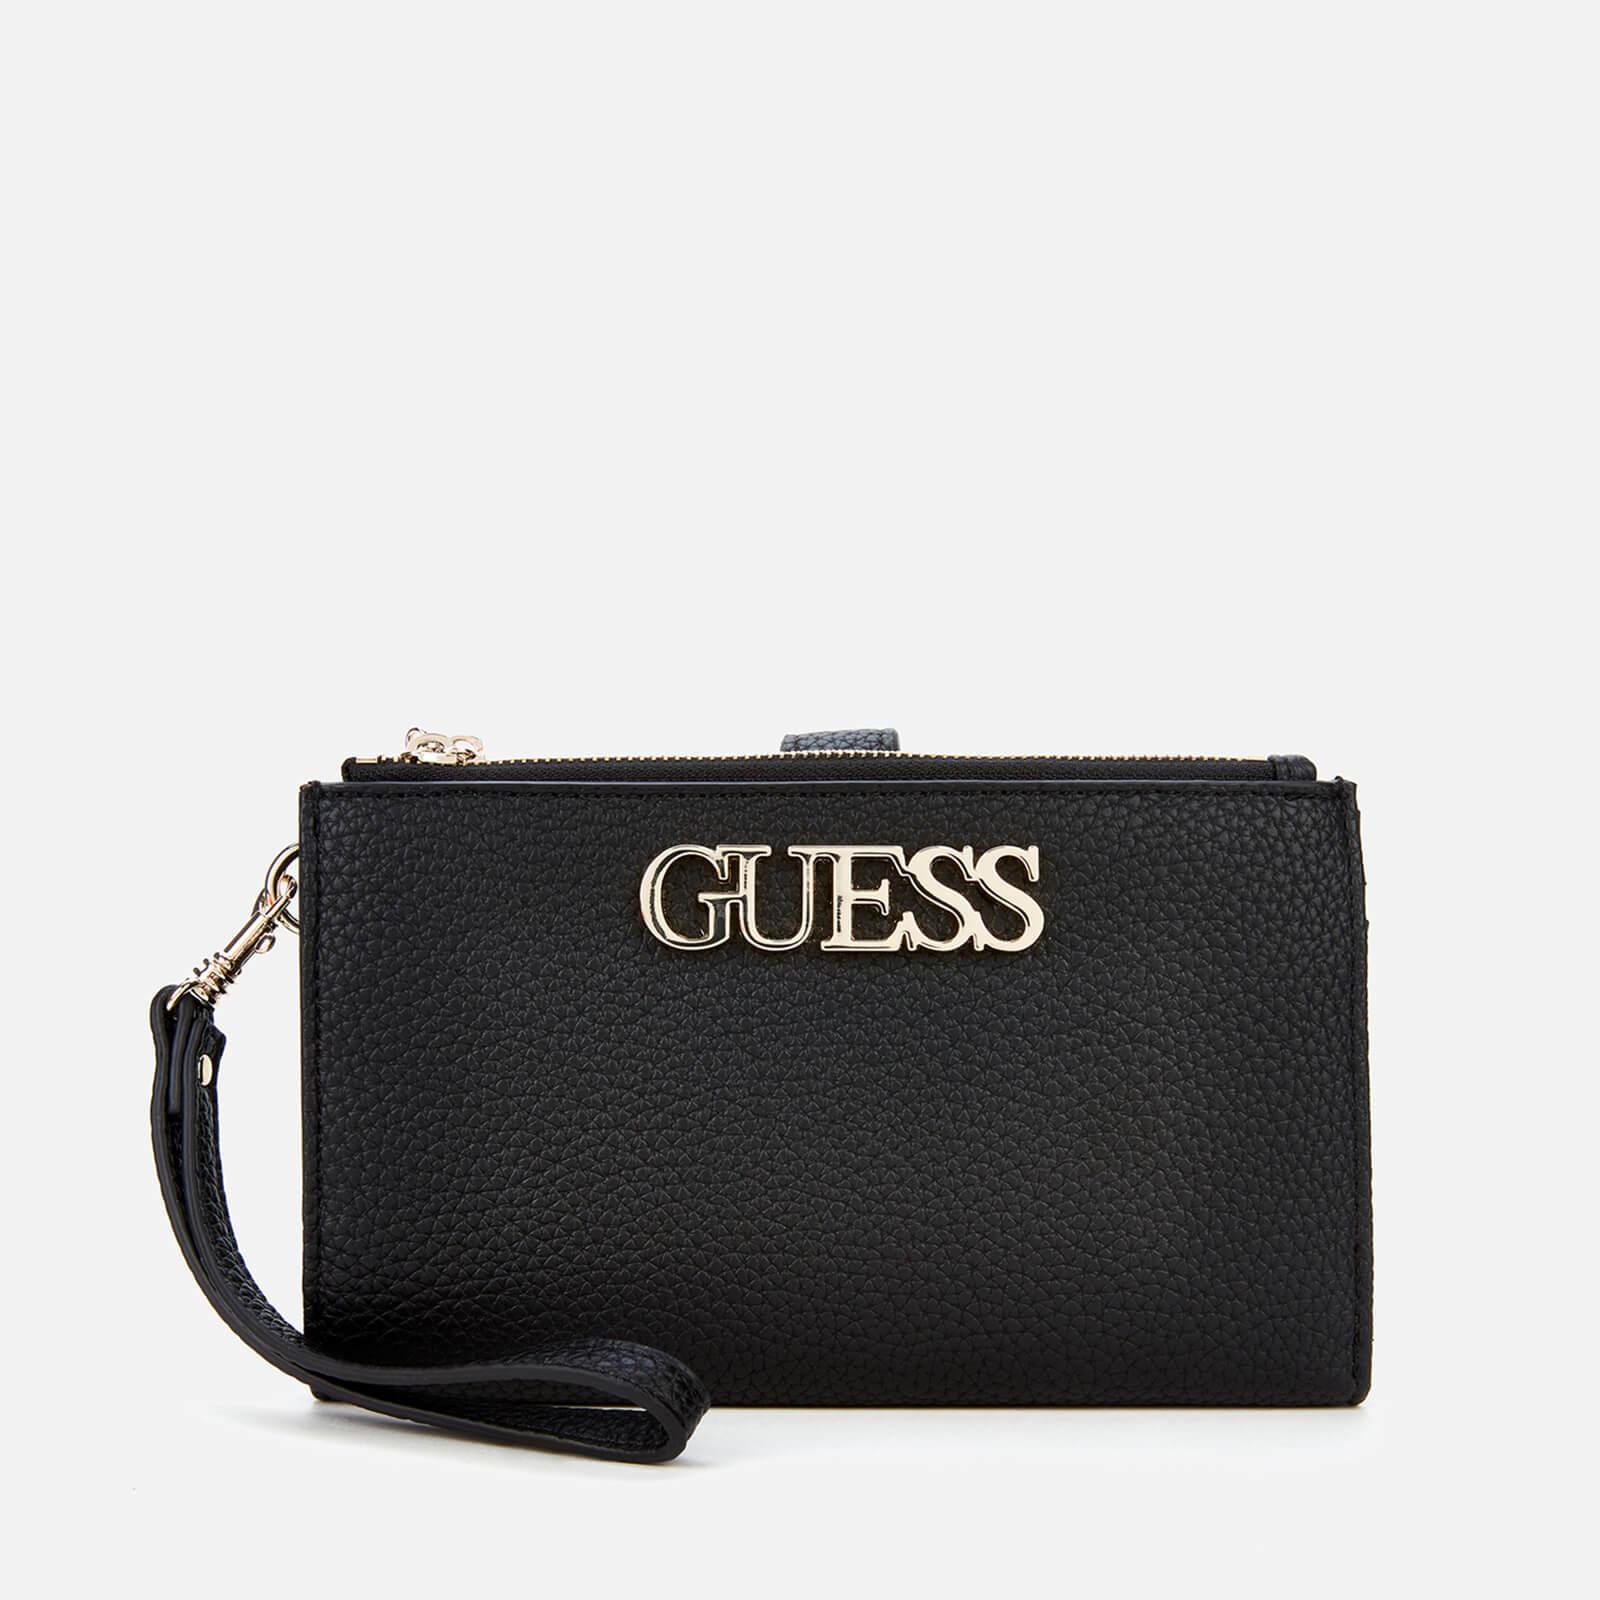 Guess Uptown Chic Double Zip Organizer Wallet in Black - Lyst